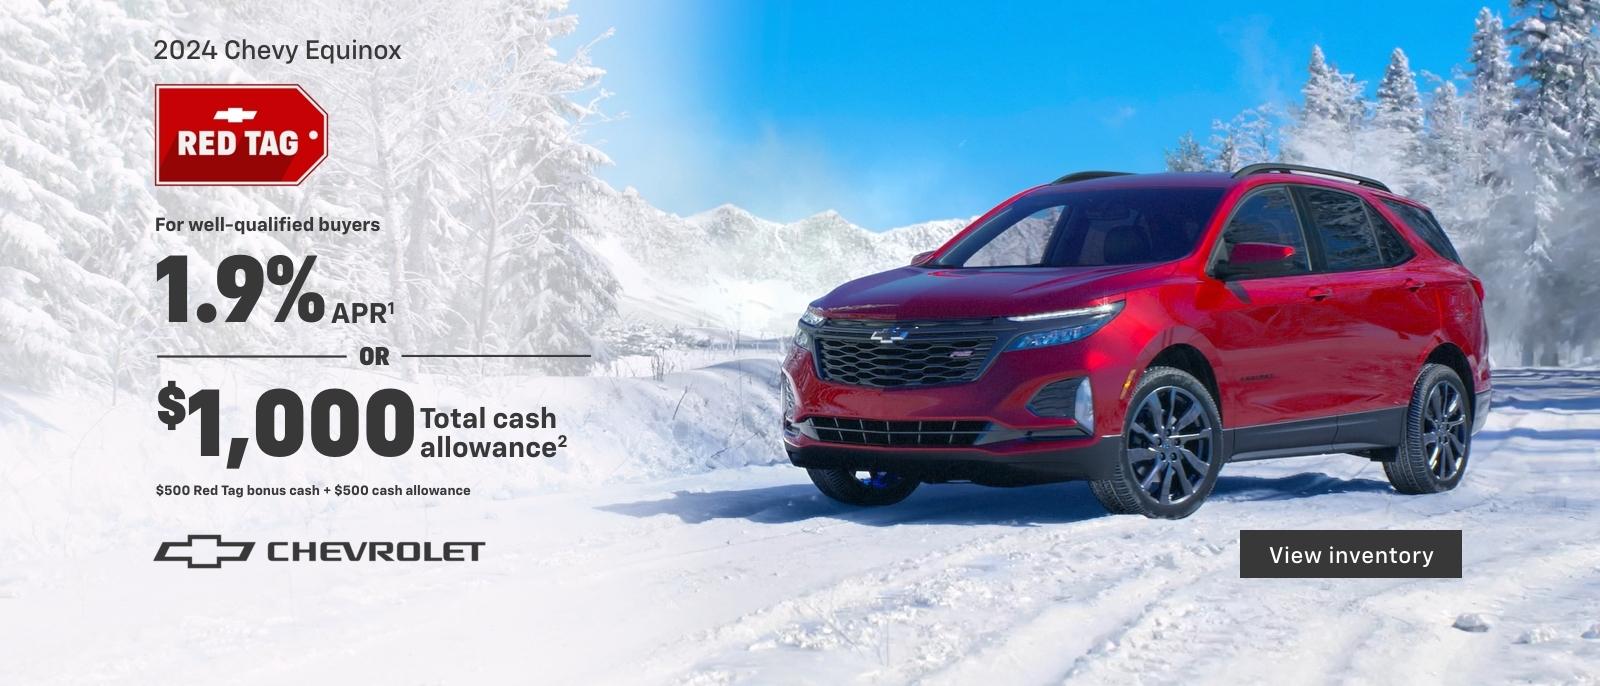 2024 Chevy Equinox. Do more together this holiday. For well-qualified buyers 1.9% APR. Or, $1,000 total cash allowance. $500 Red Tag bonus cash + $500 cash allowance.